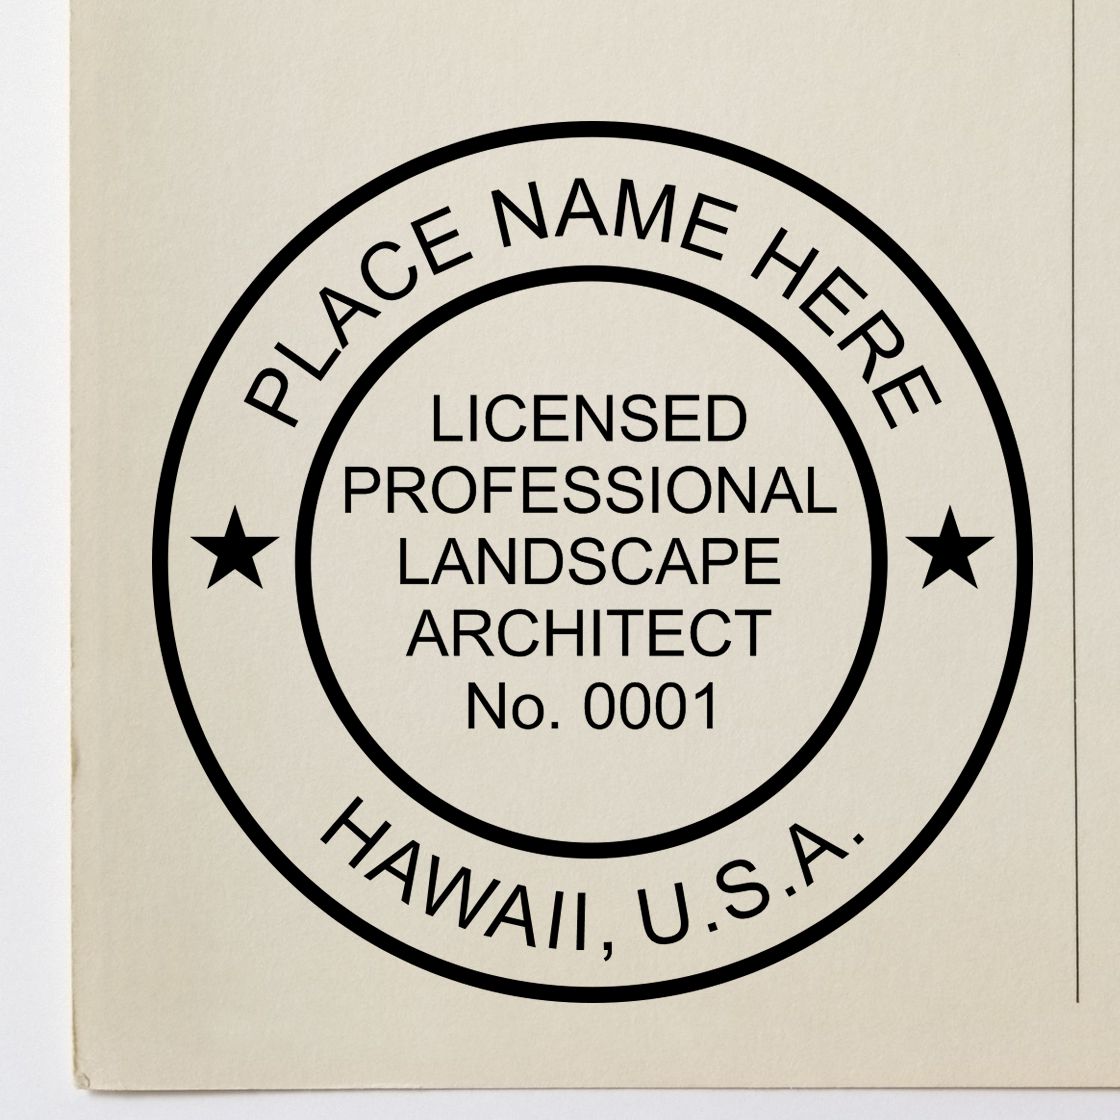 Premium MaxLight Pre-Inked Hawaii Landscape Architectural Stamp in use photo showing a stamped imprint of the Premium MaxLight Pre-Inked Hawaii Landscape Architectural Stamp